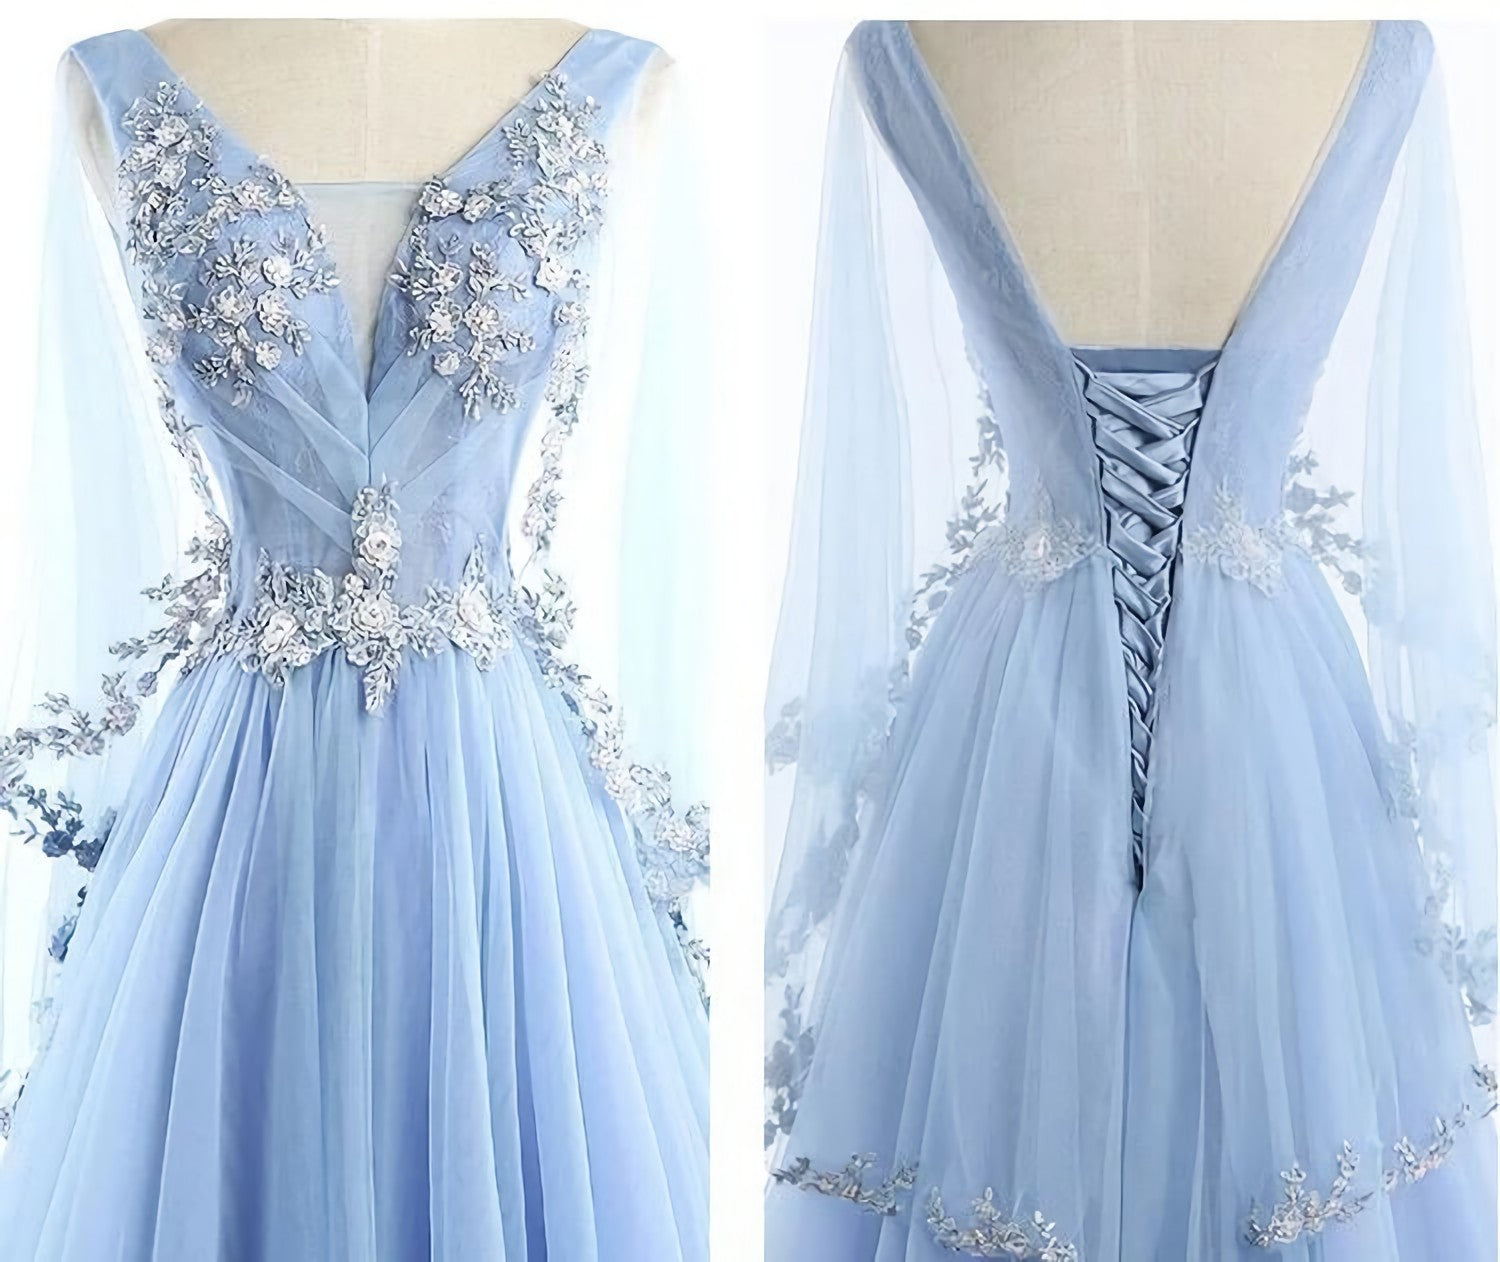 Party Dresses Stores, Beautiful Tulle Light Blue Floor Length Prom Dress, New Party Dress